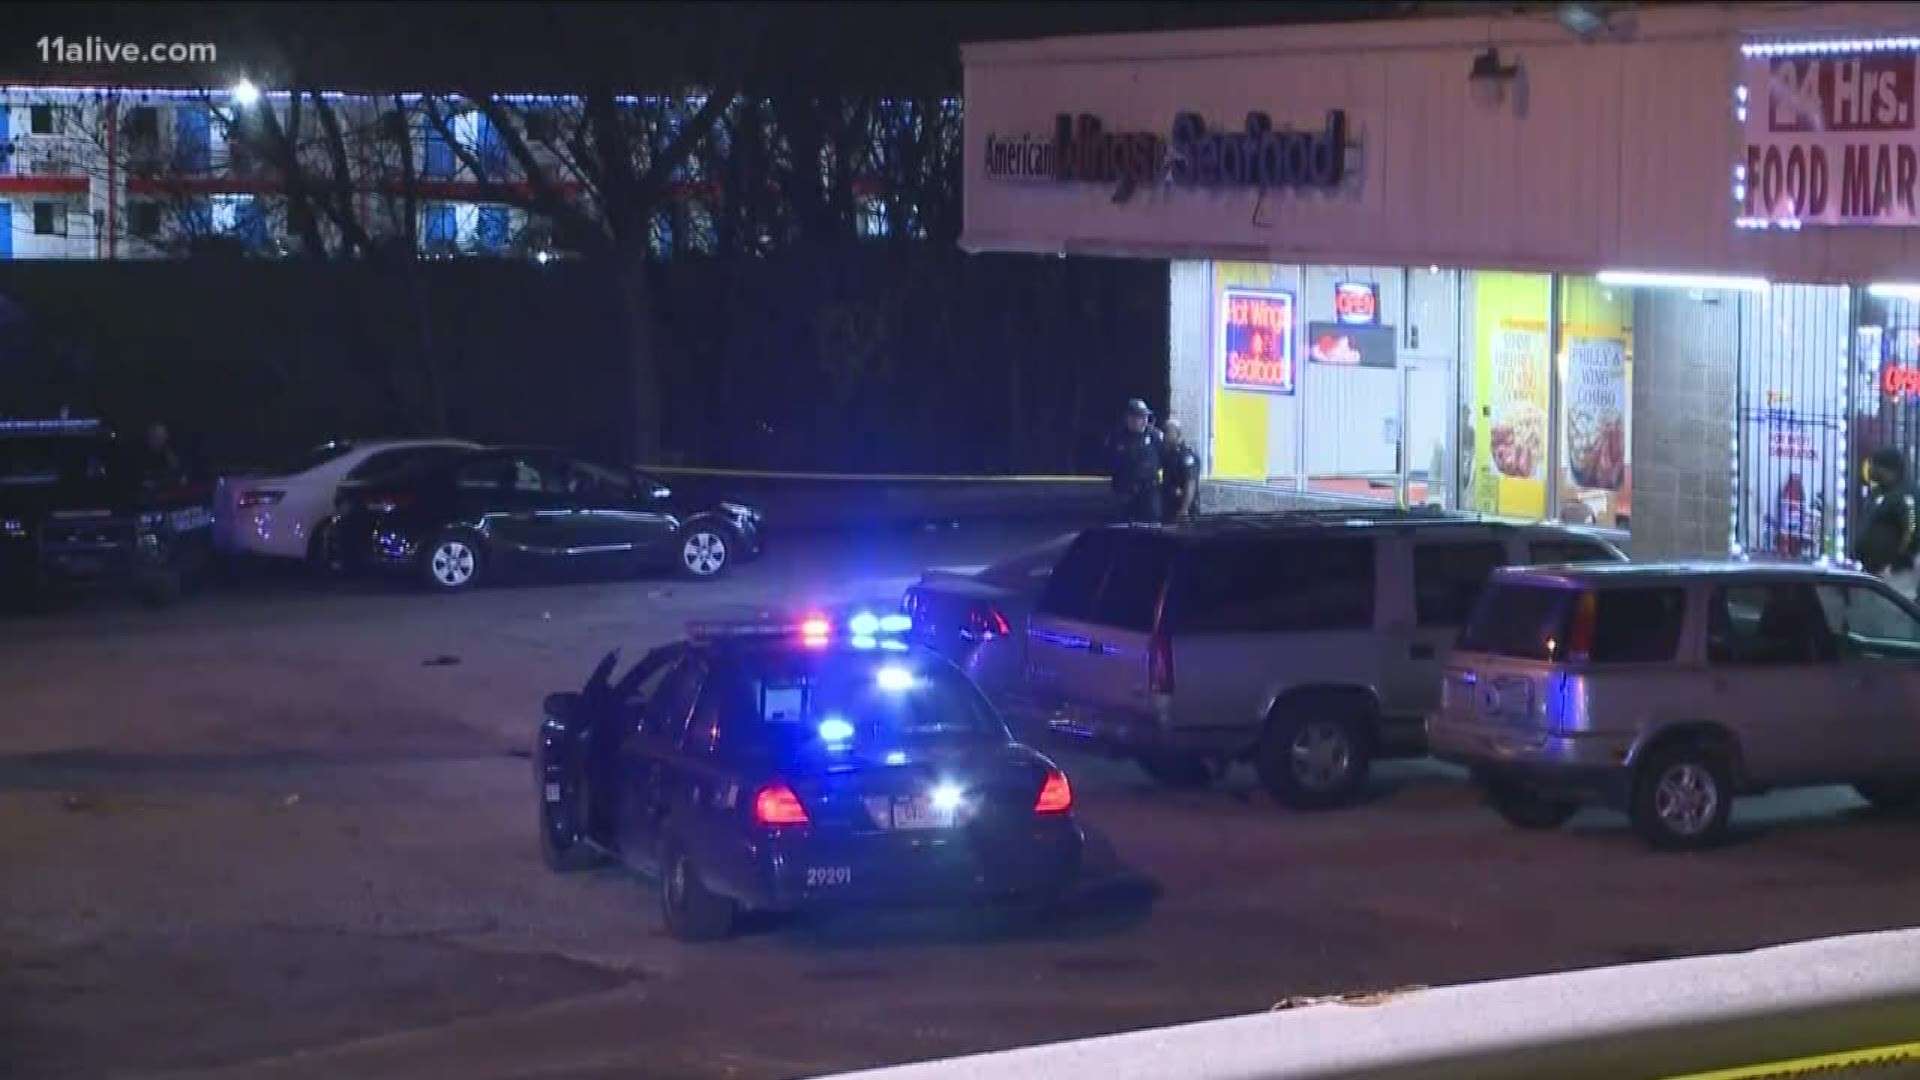 Police found the woman shot in the head outside a strip mall late Friday evening in Atlanta.